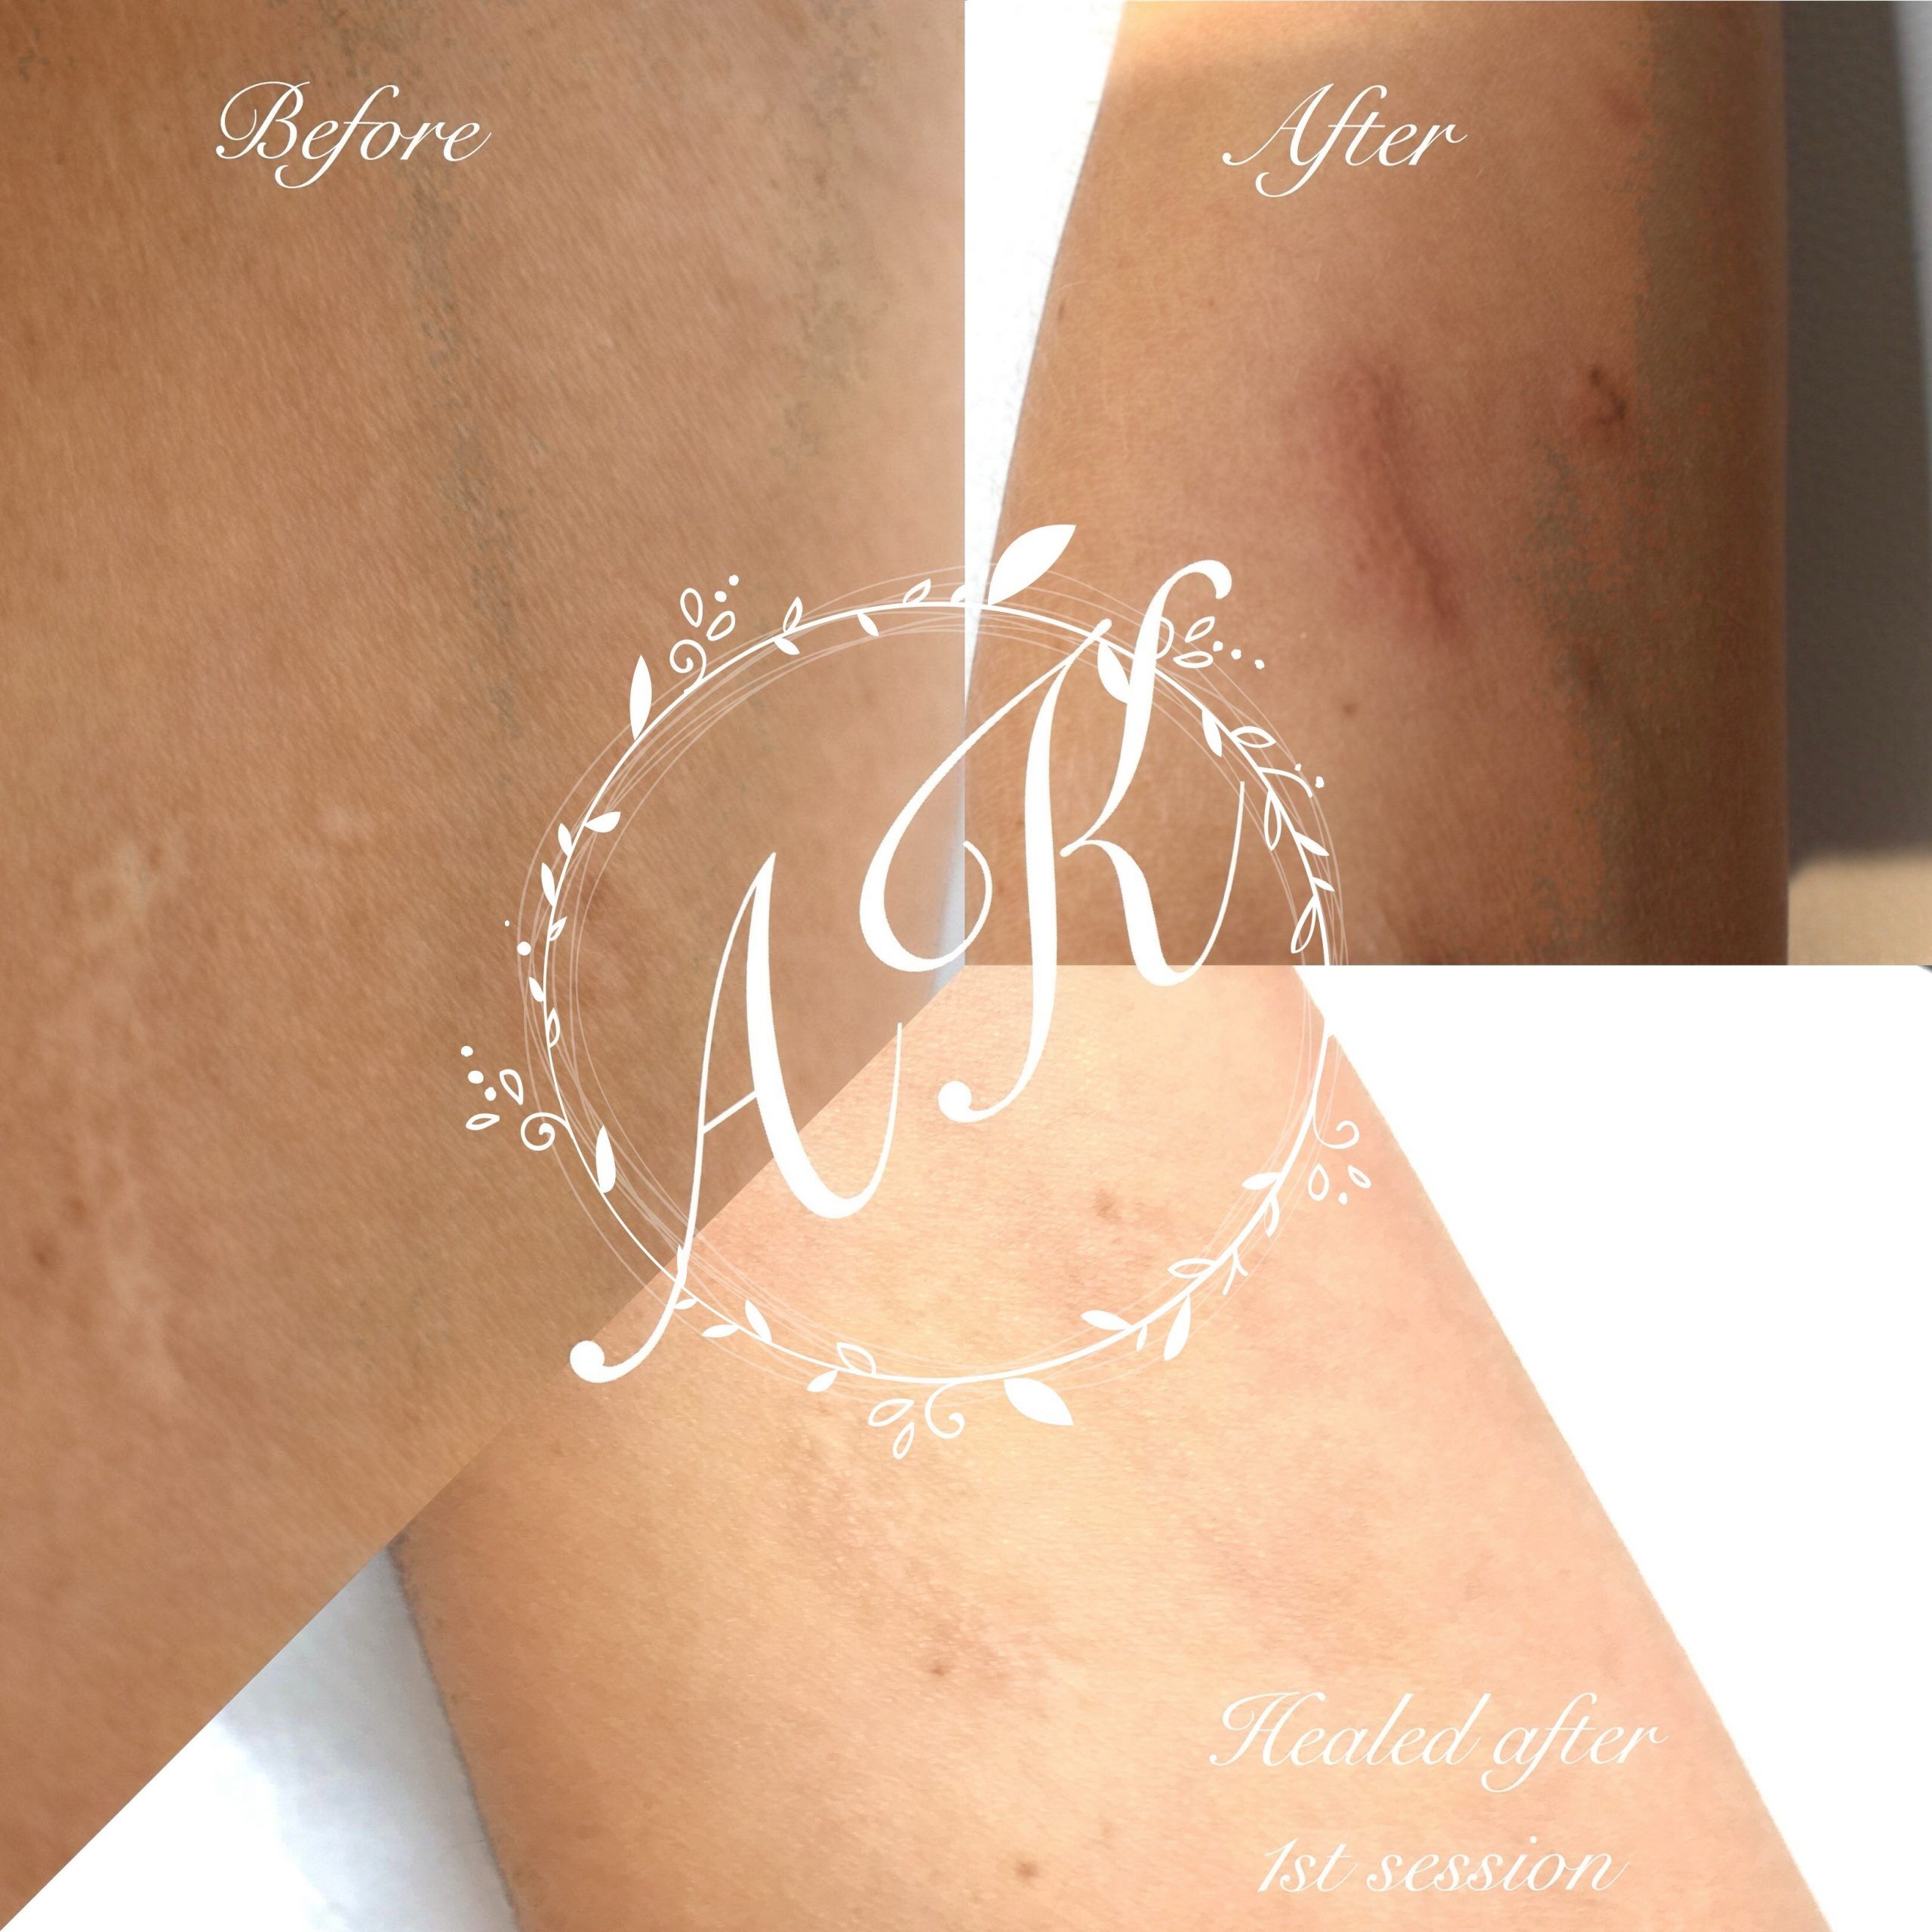 Laser Treatment Before and After Photos - Total Body Laser & Med Spa |  Madison Wisconsin